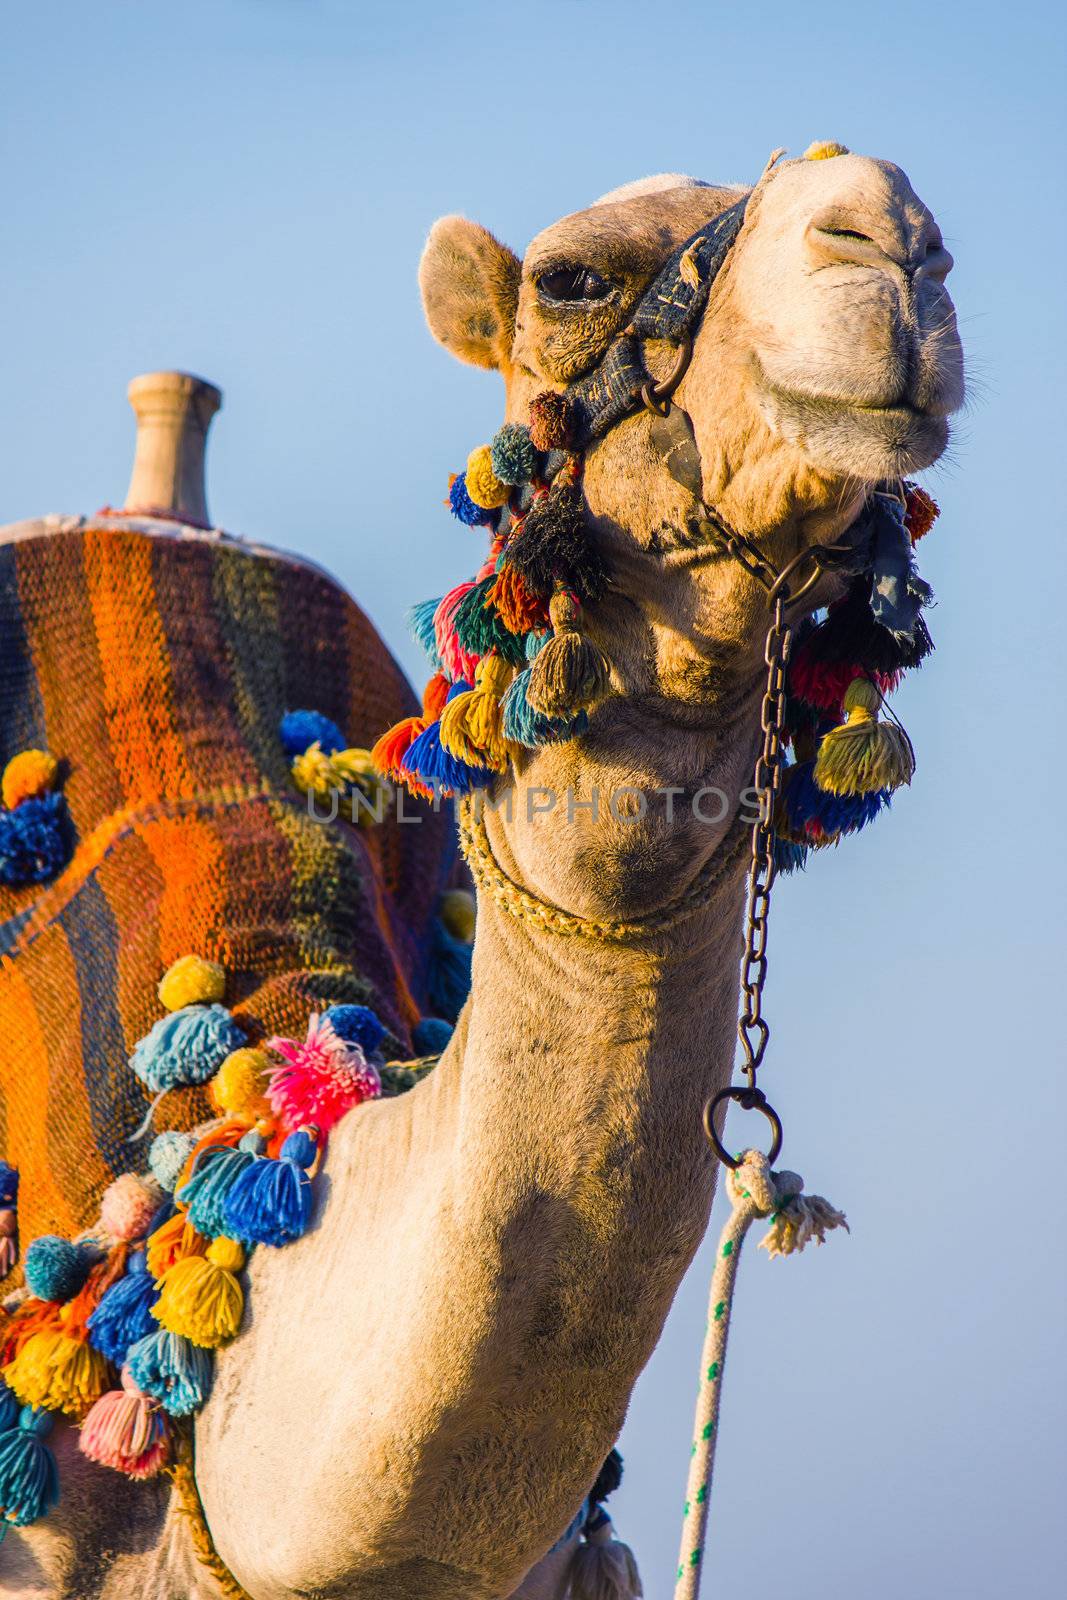 The muzzle of the African camel close-up